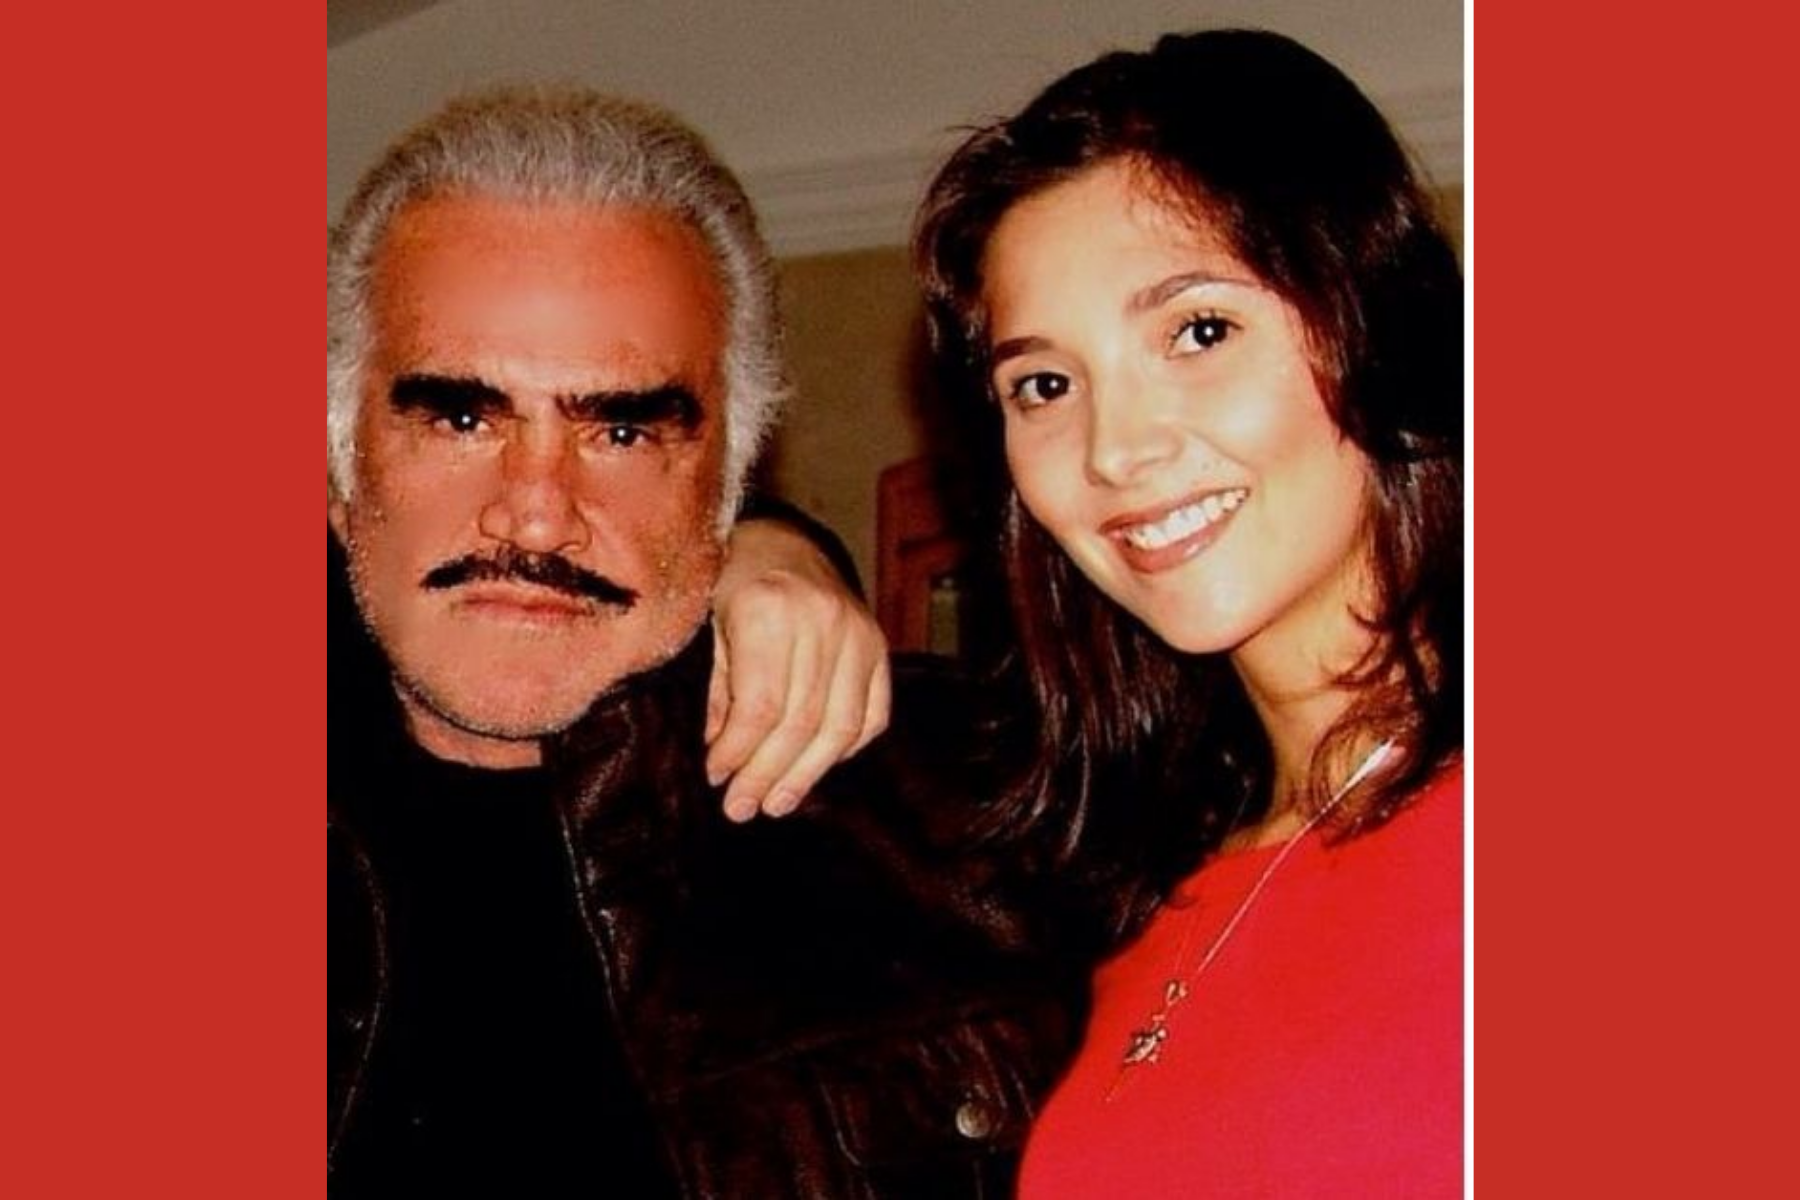 Alejandra Fernández wearing a red shirt with her late father Vicente Fernández